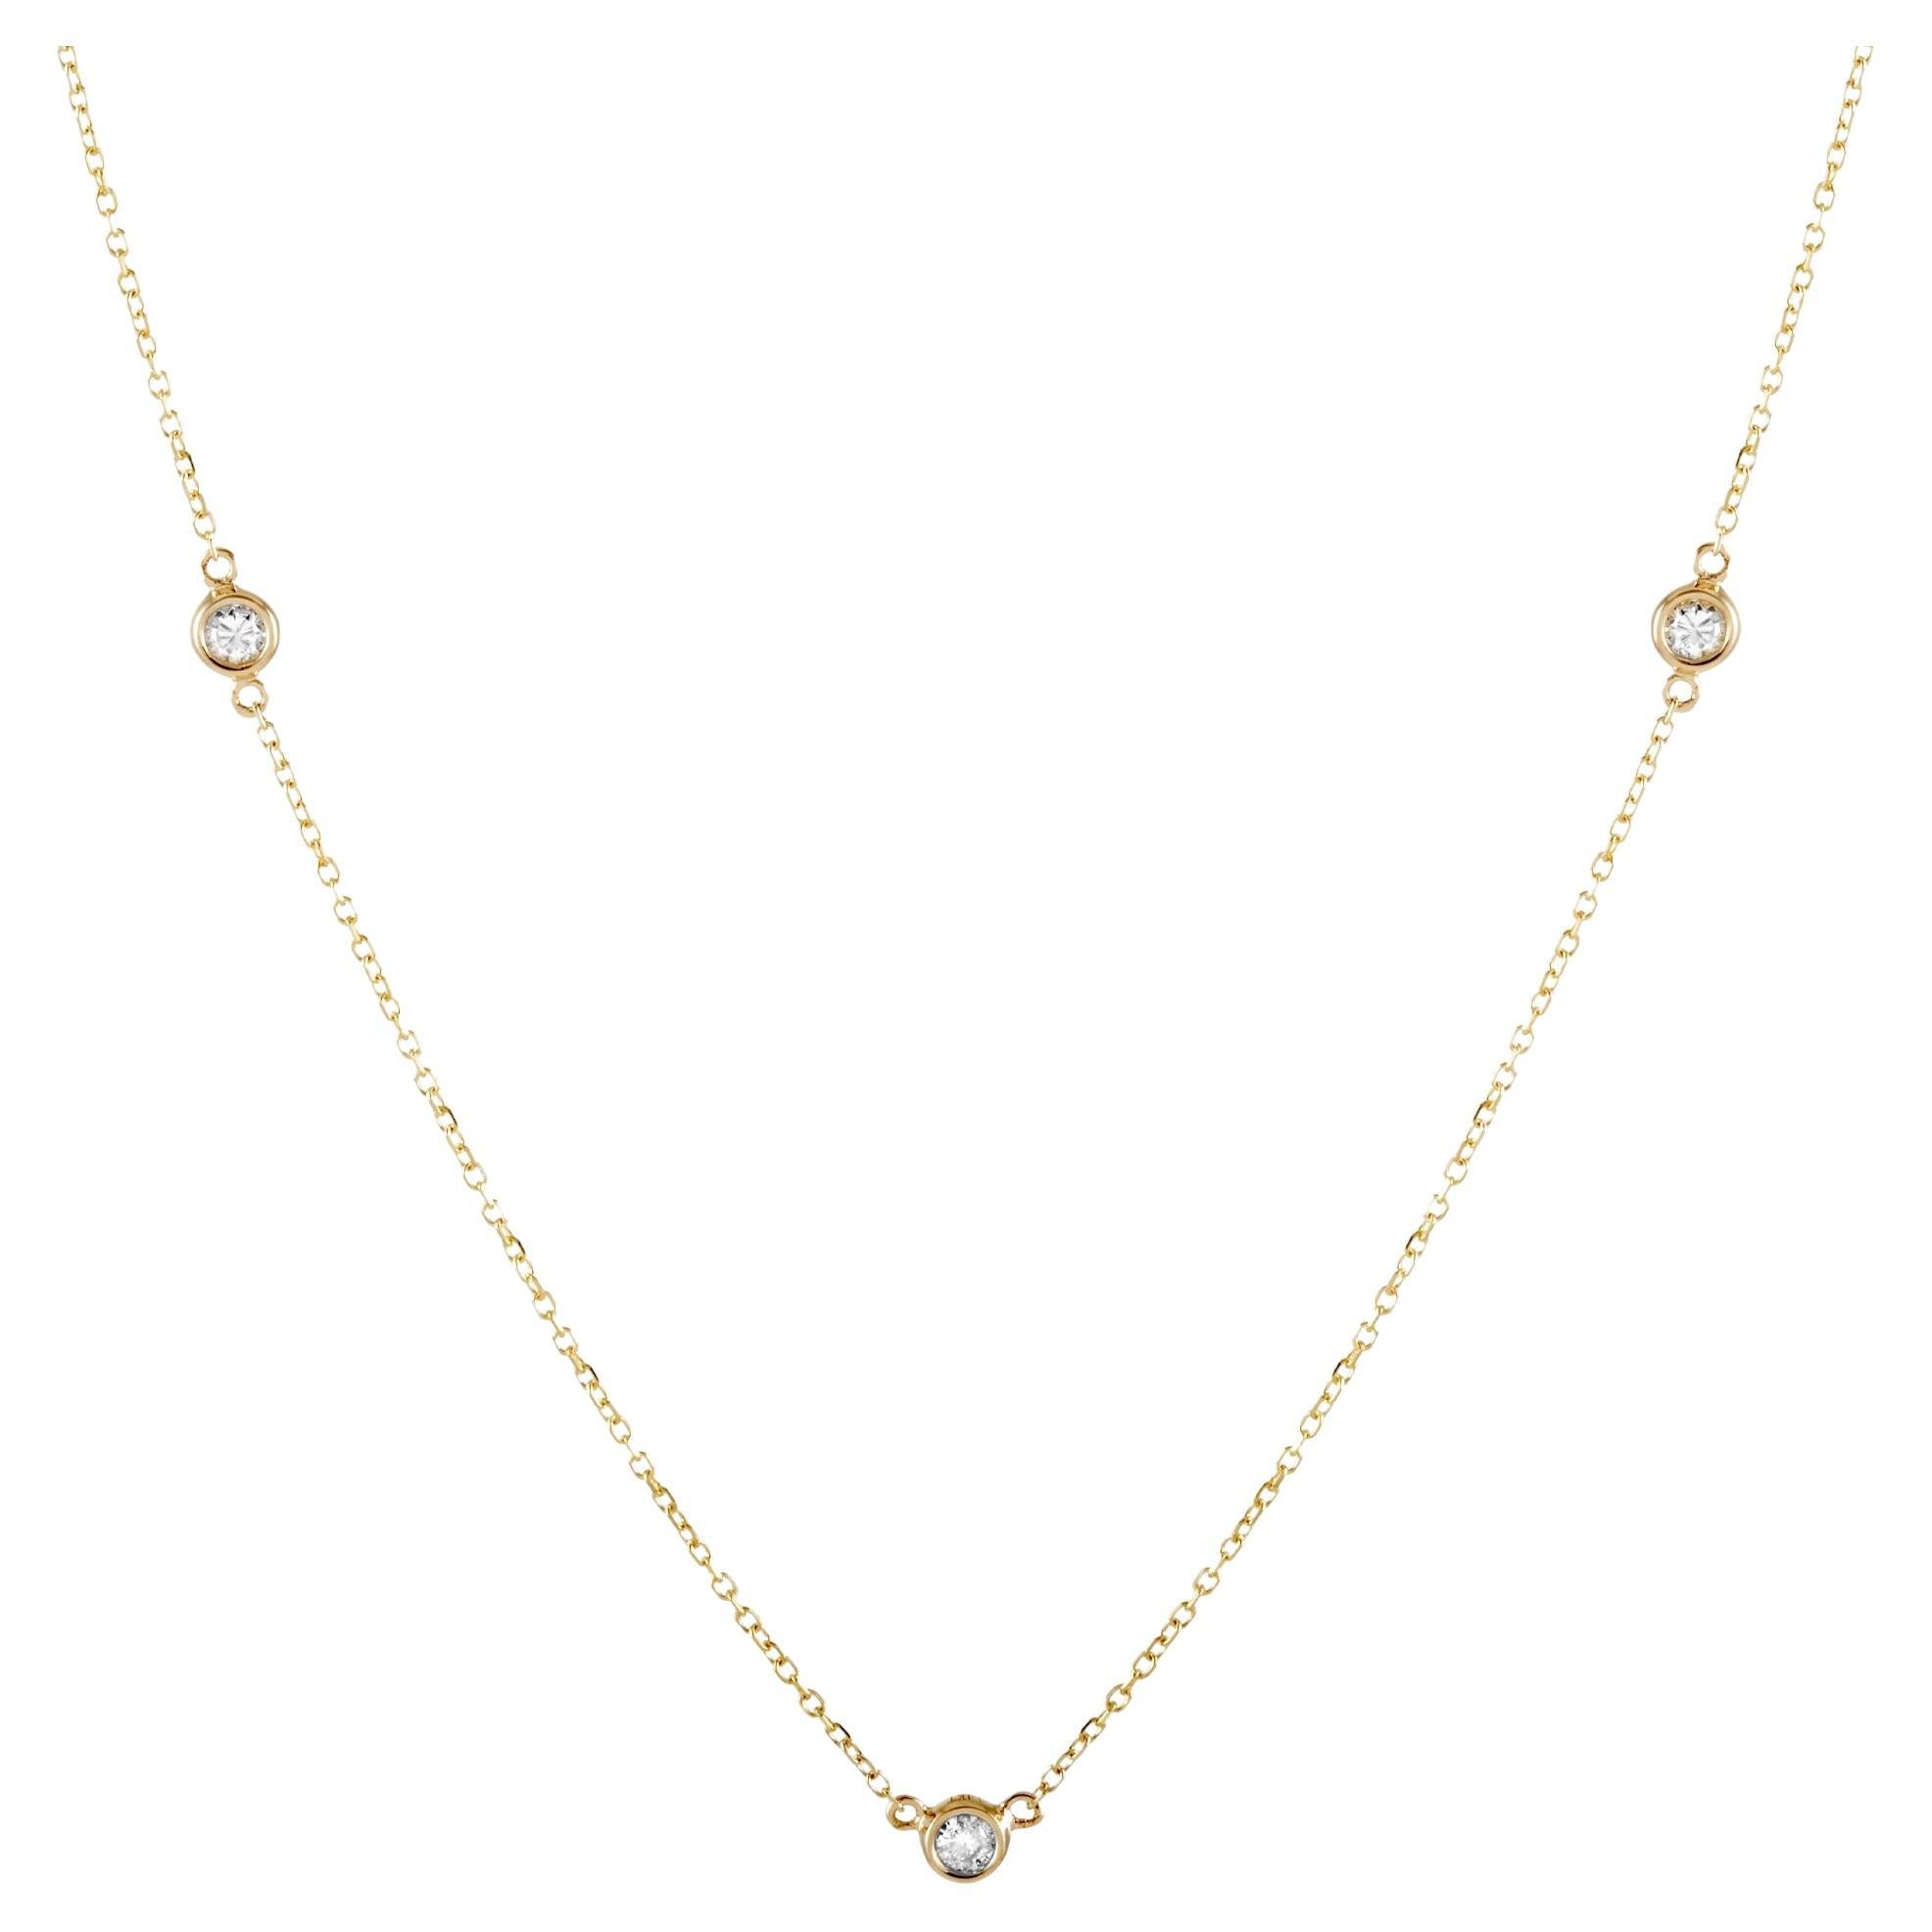 LB Exclusive 14K Yellow Gold 0.15 ct Diamond Necklace For Sale